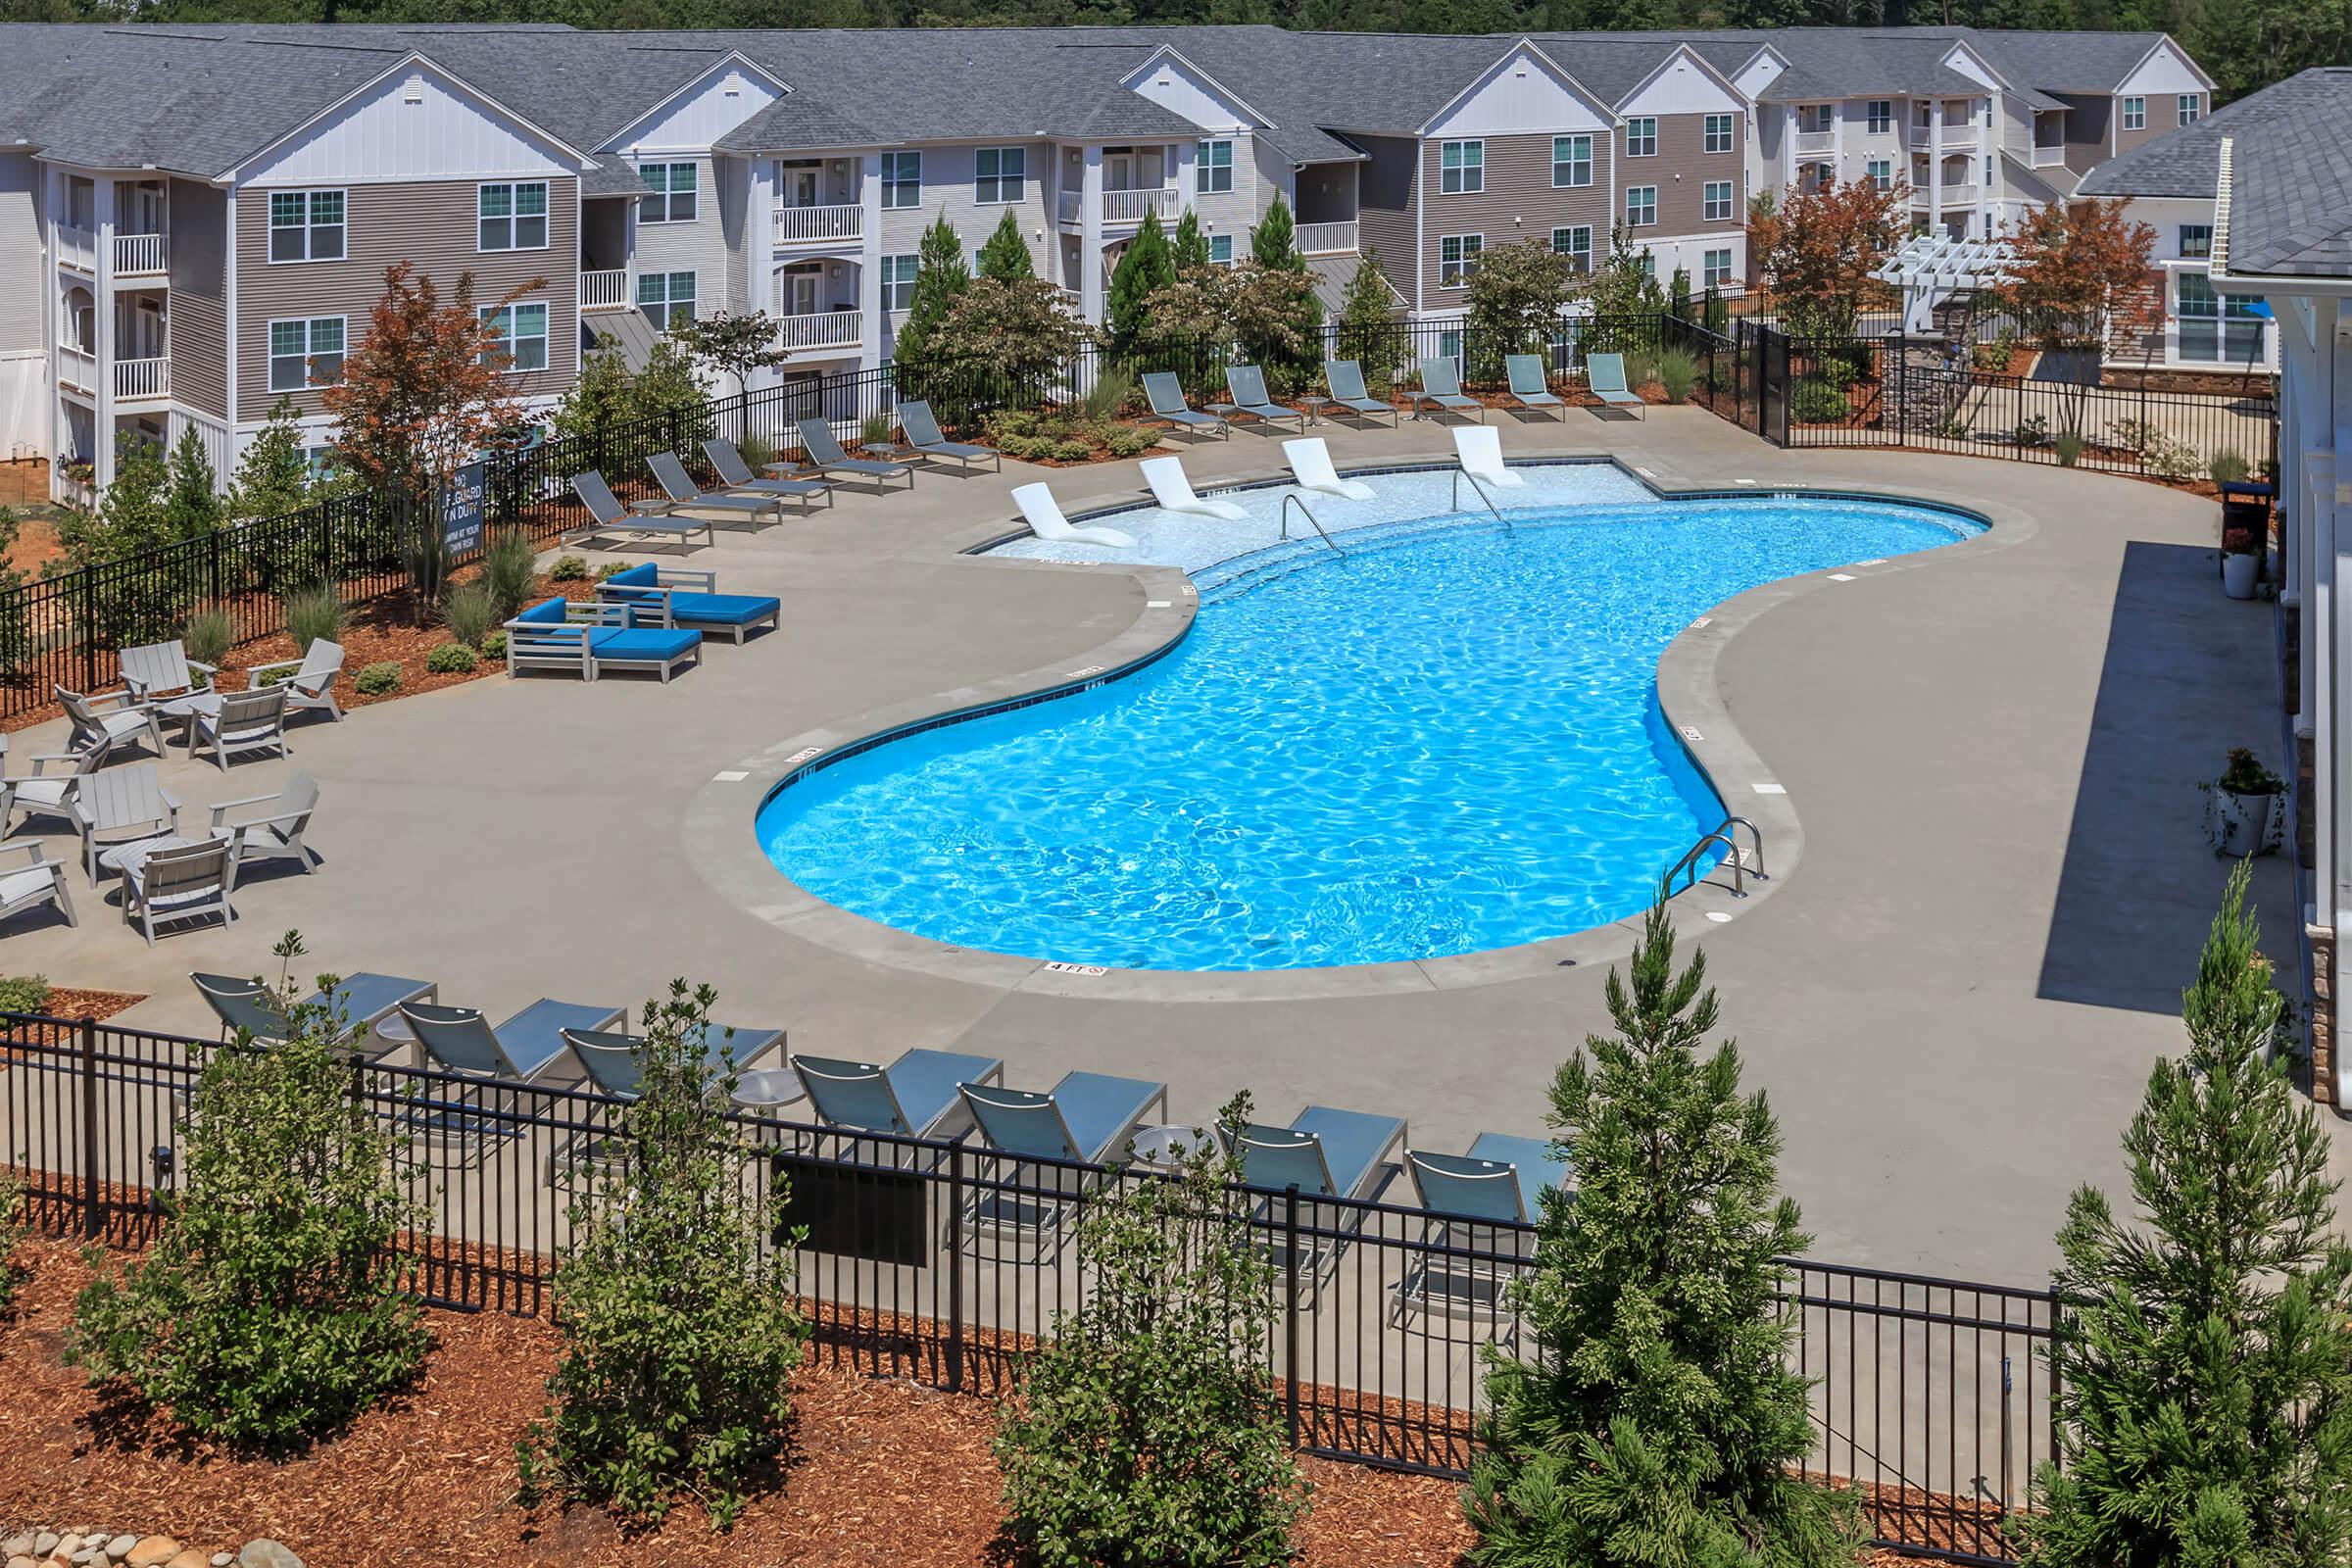 Cool Down By The Pool At Riverstone Apartments At Long Shoals In Arden, NC